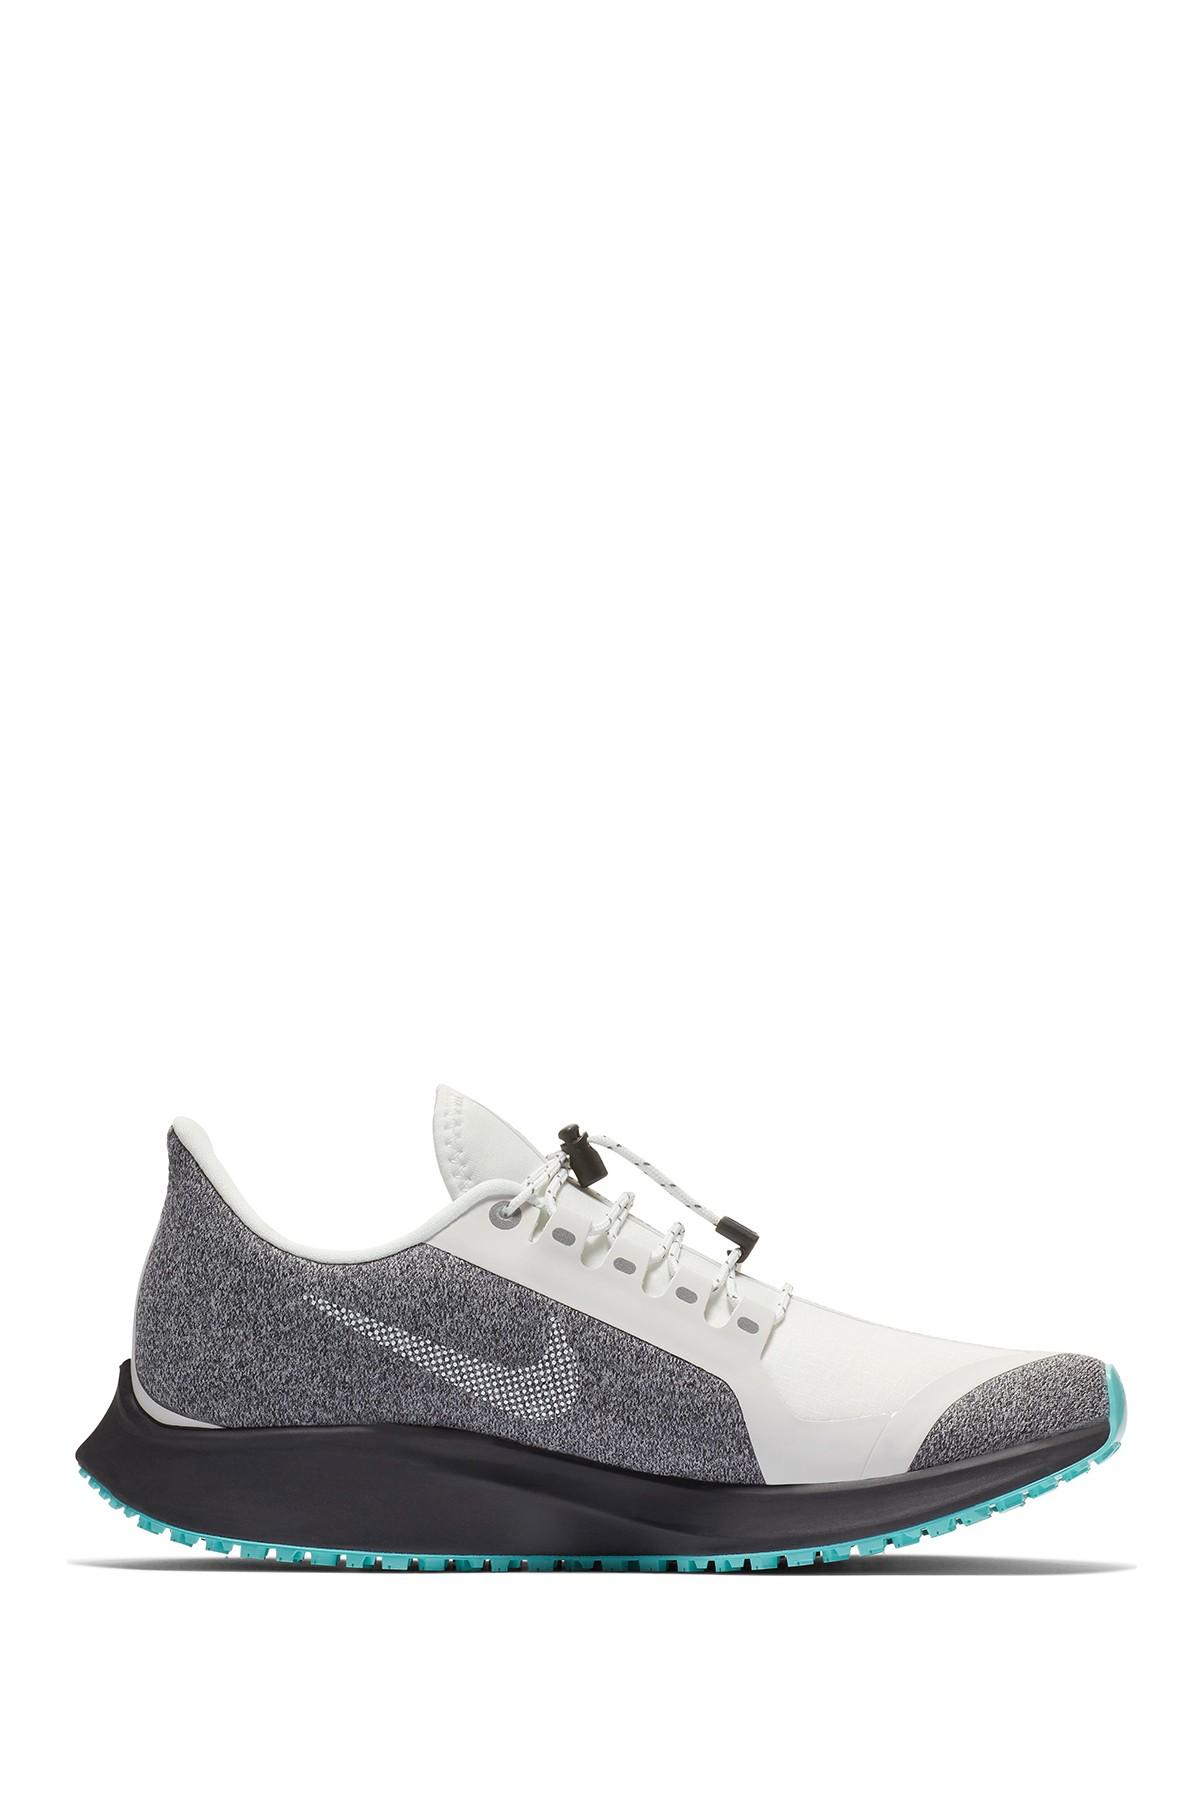 Nike Zoom Pegasus Shield Gs Water Repellent Running Shoe in White | Lyst